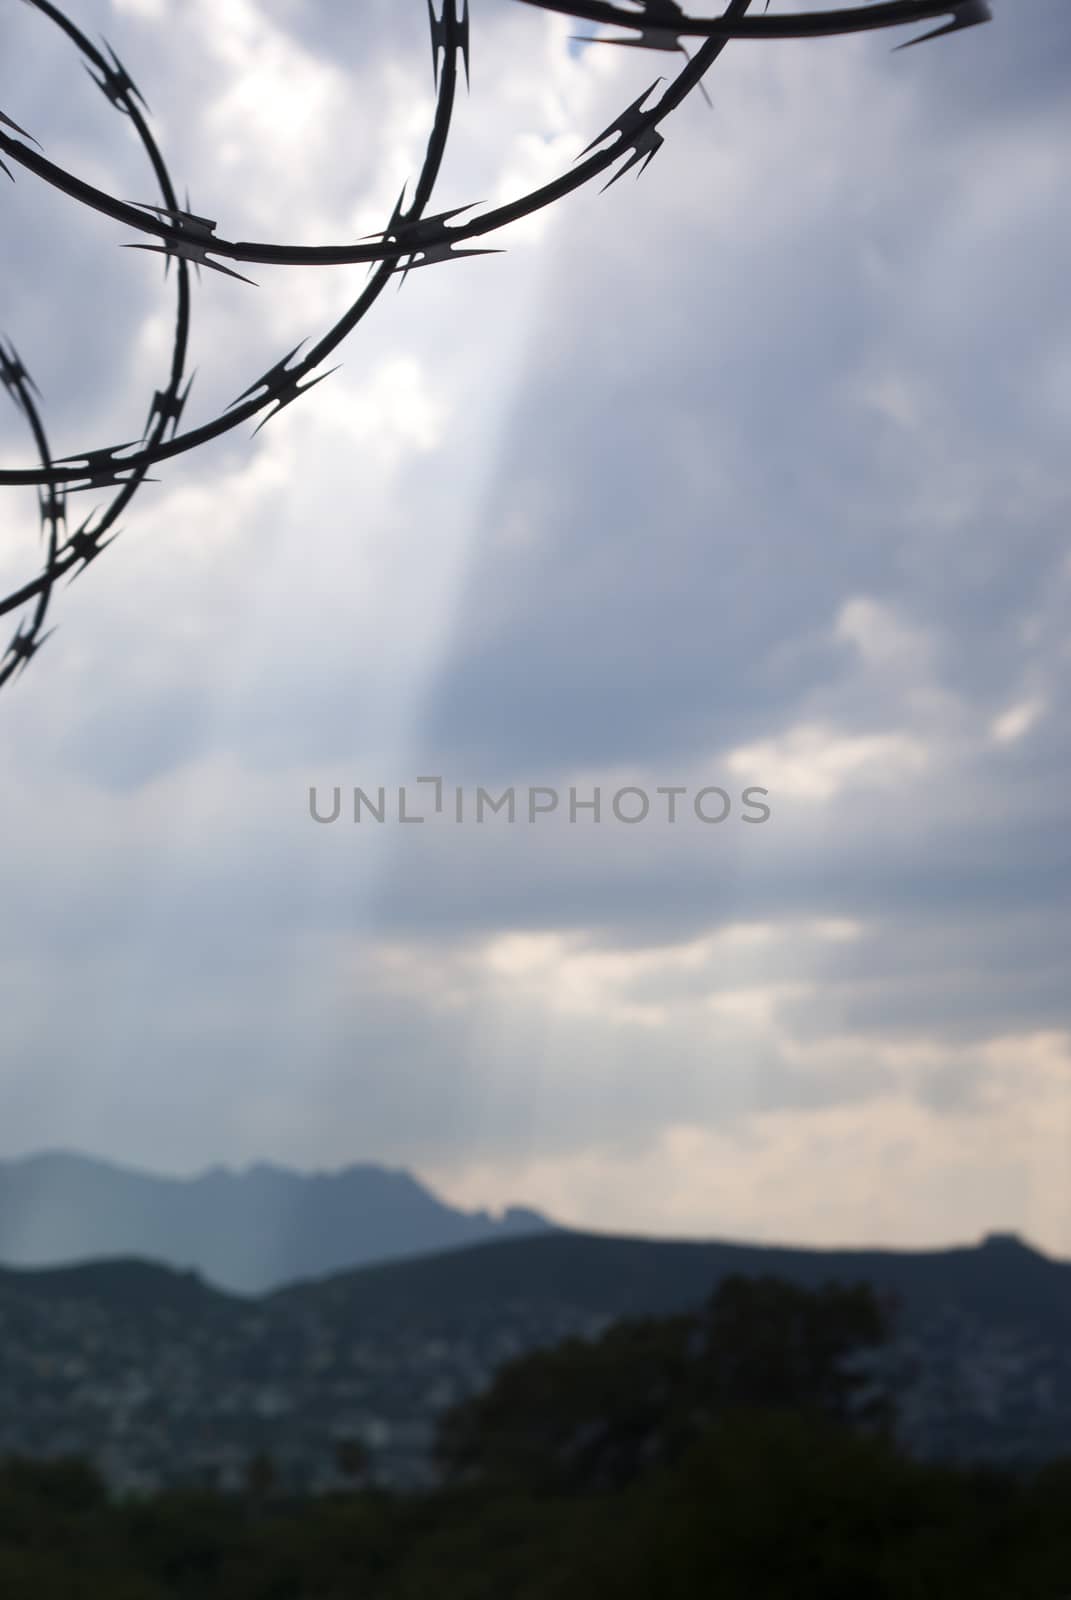 Photograph of a blue cloudy bright sky with a barb wire silhouette